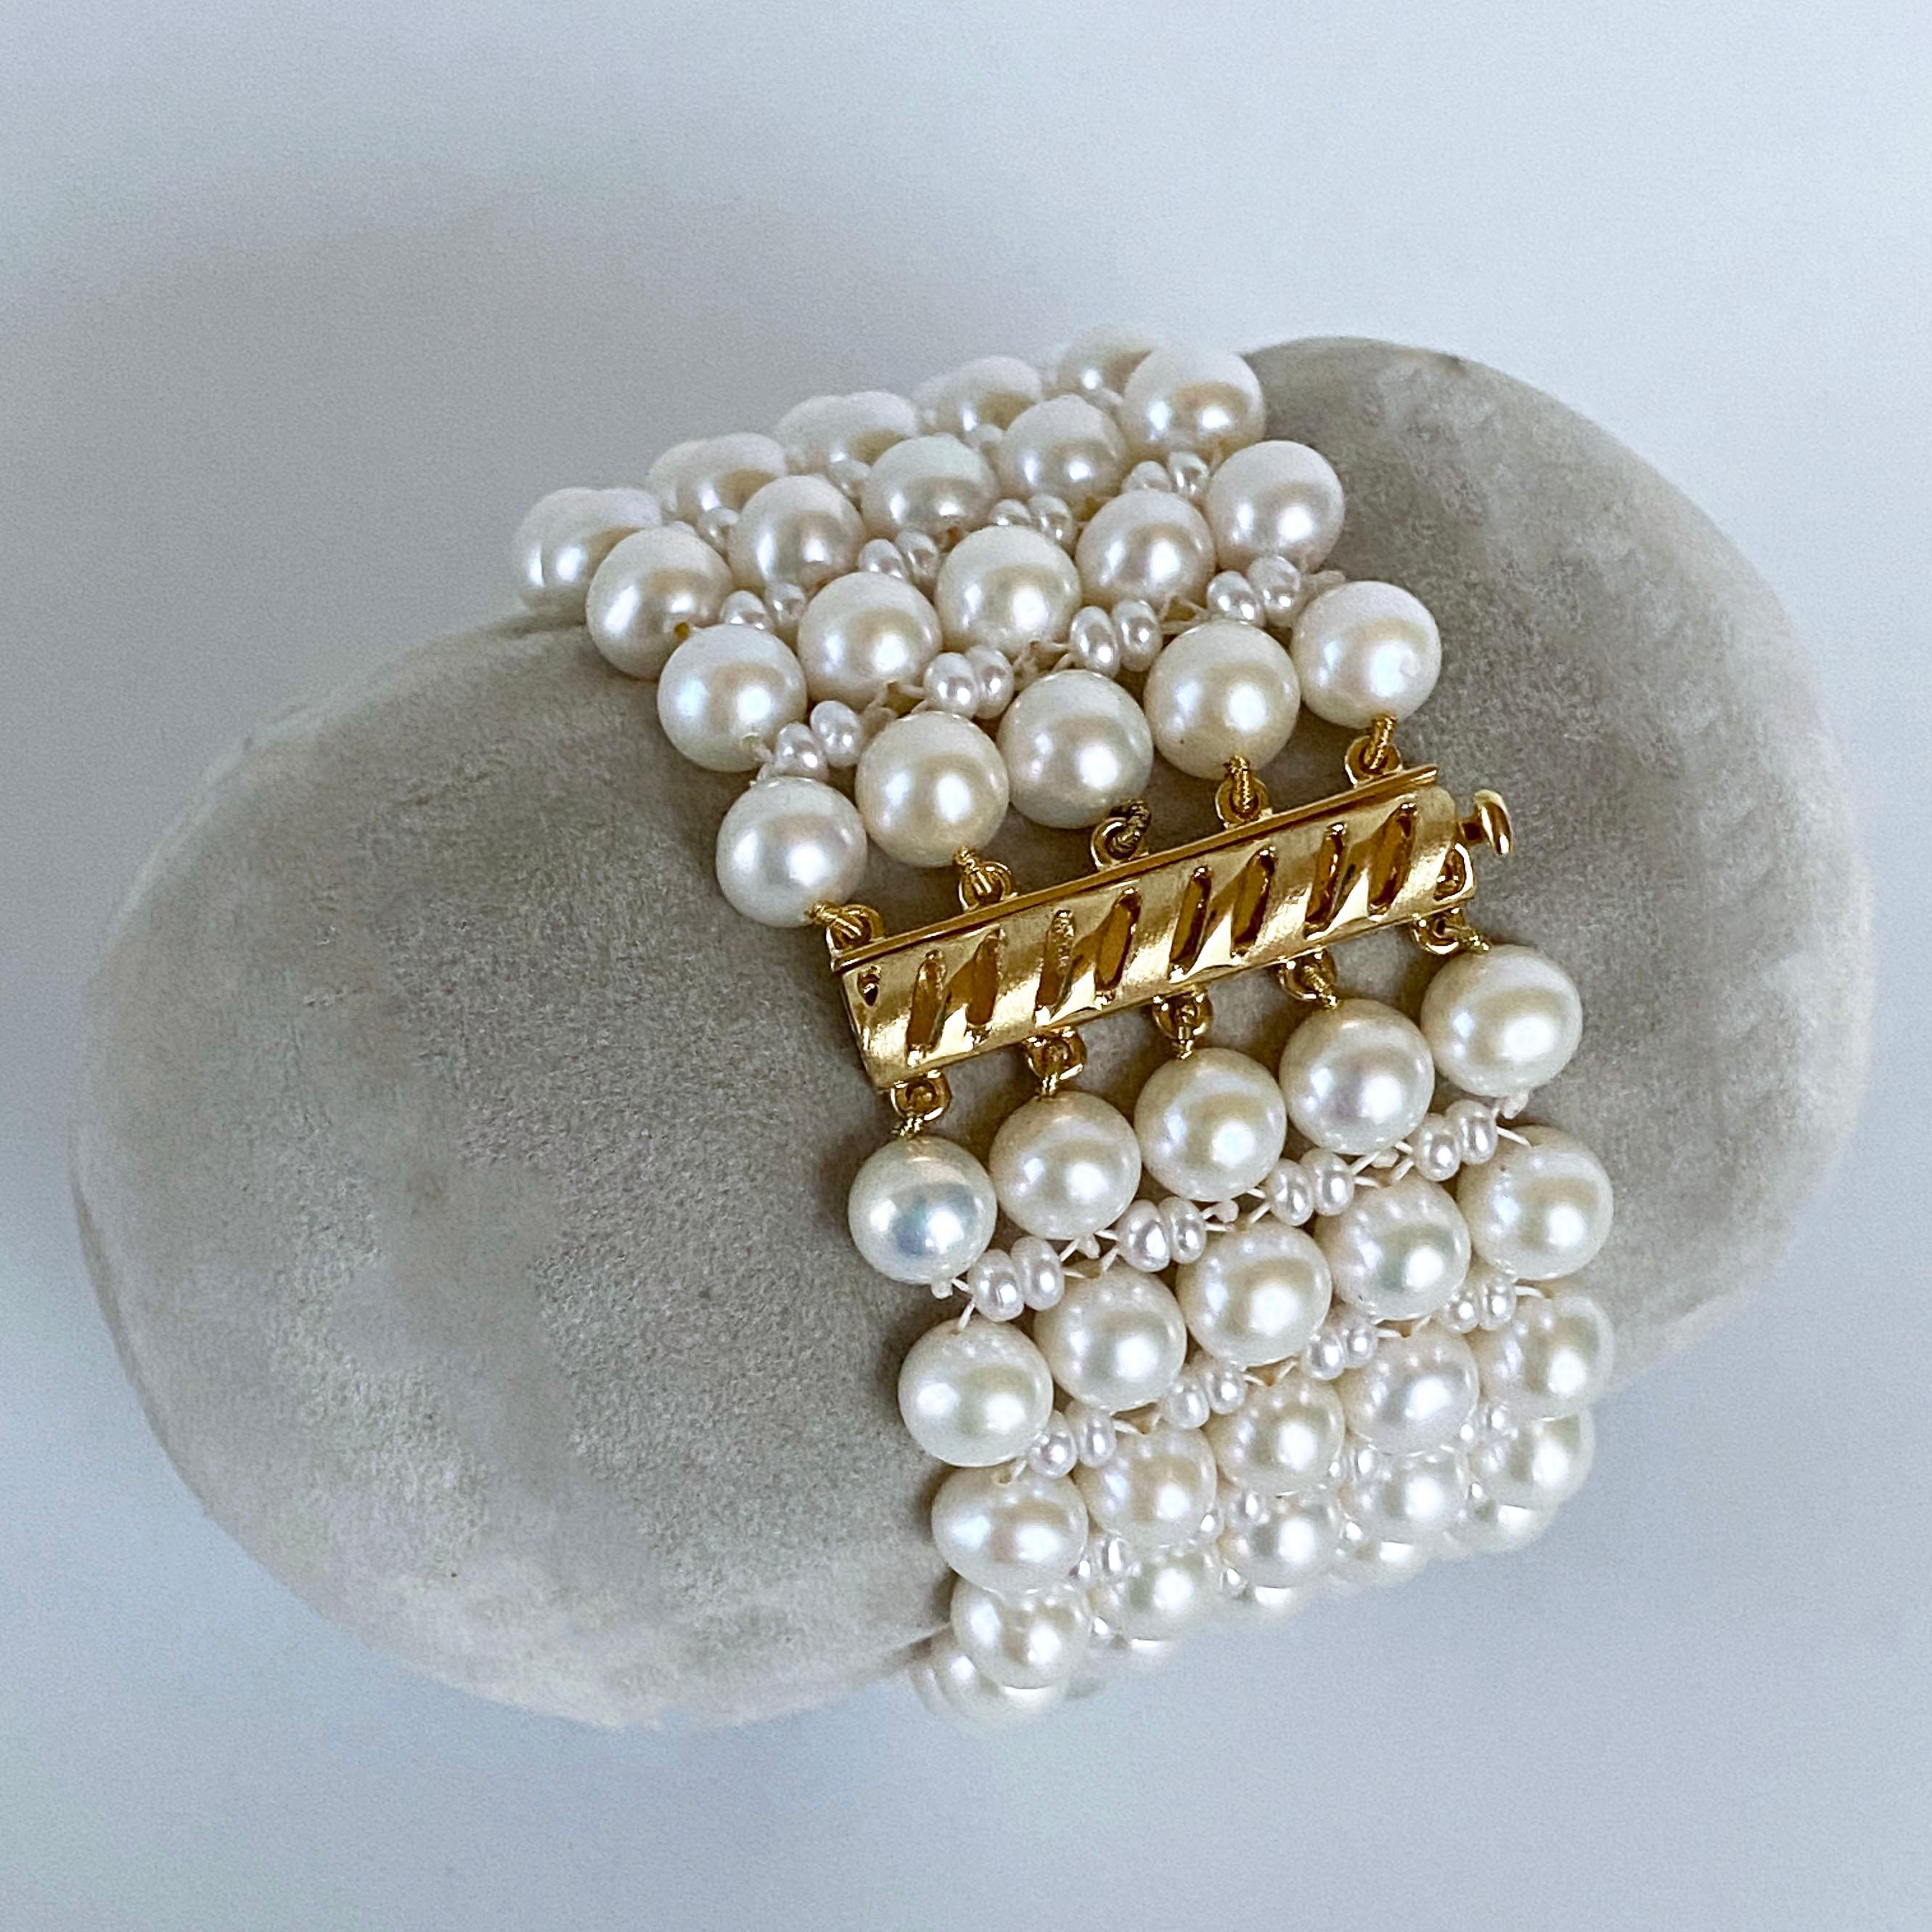 Marina J. Woven Pearl Bracelet with 14k Yellow Gold Plated Silver Sliding Clasp For Sale 5